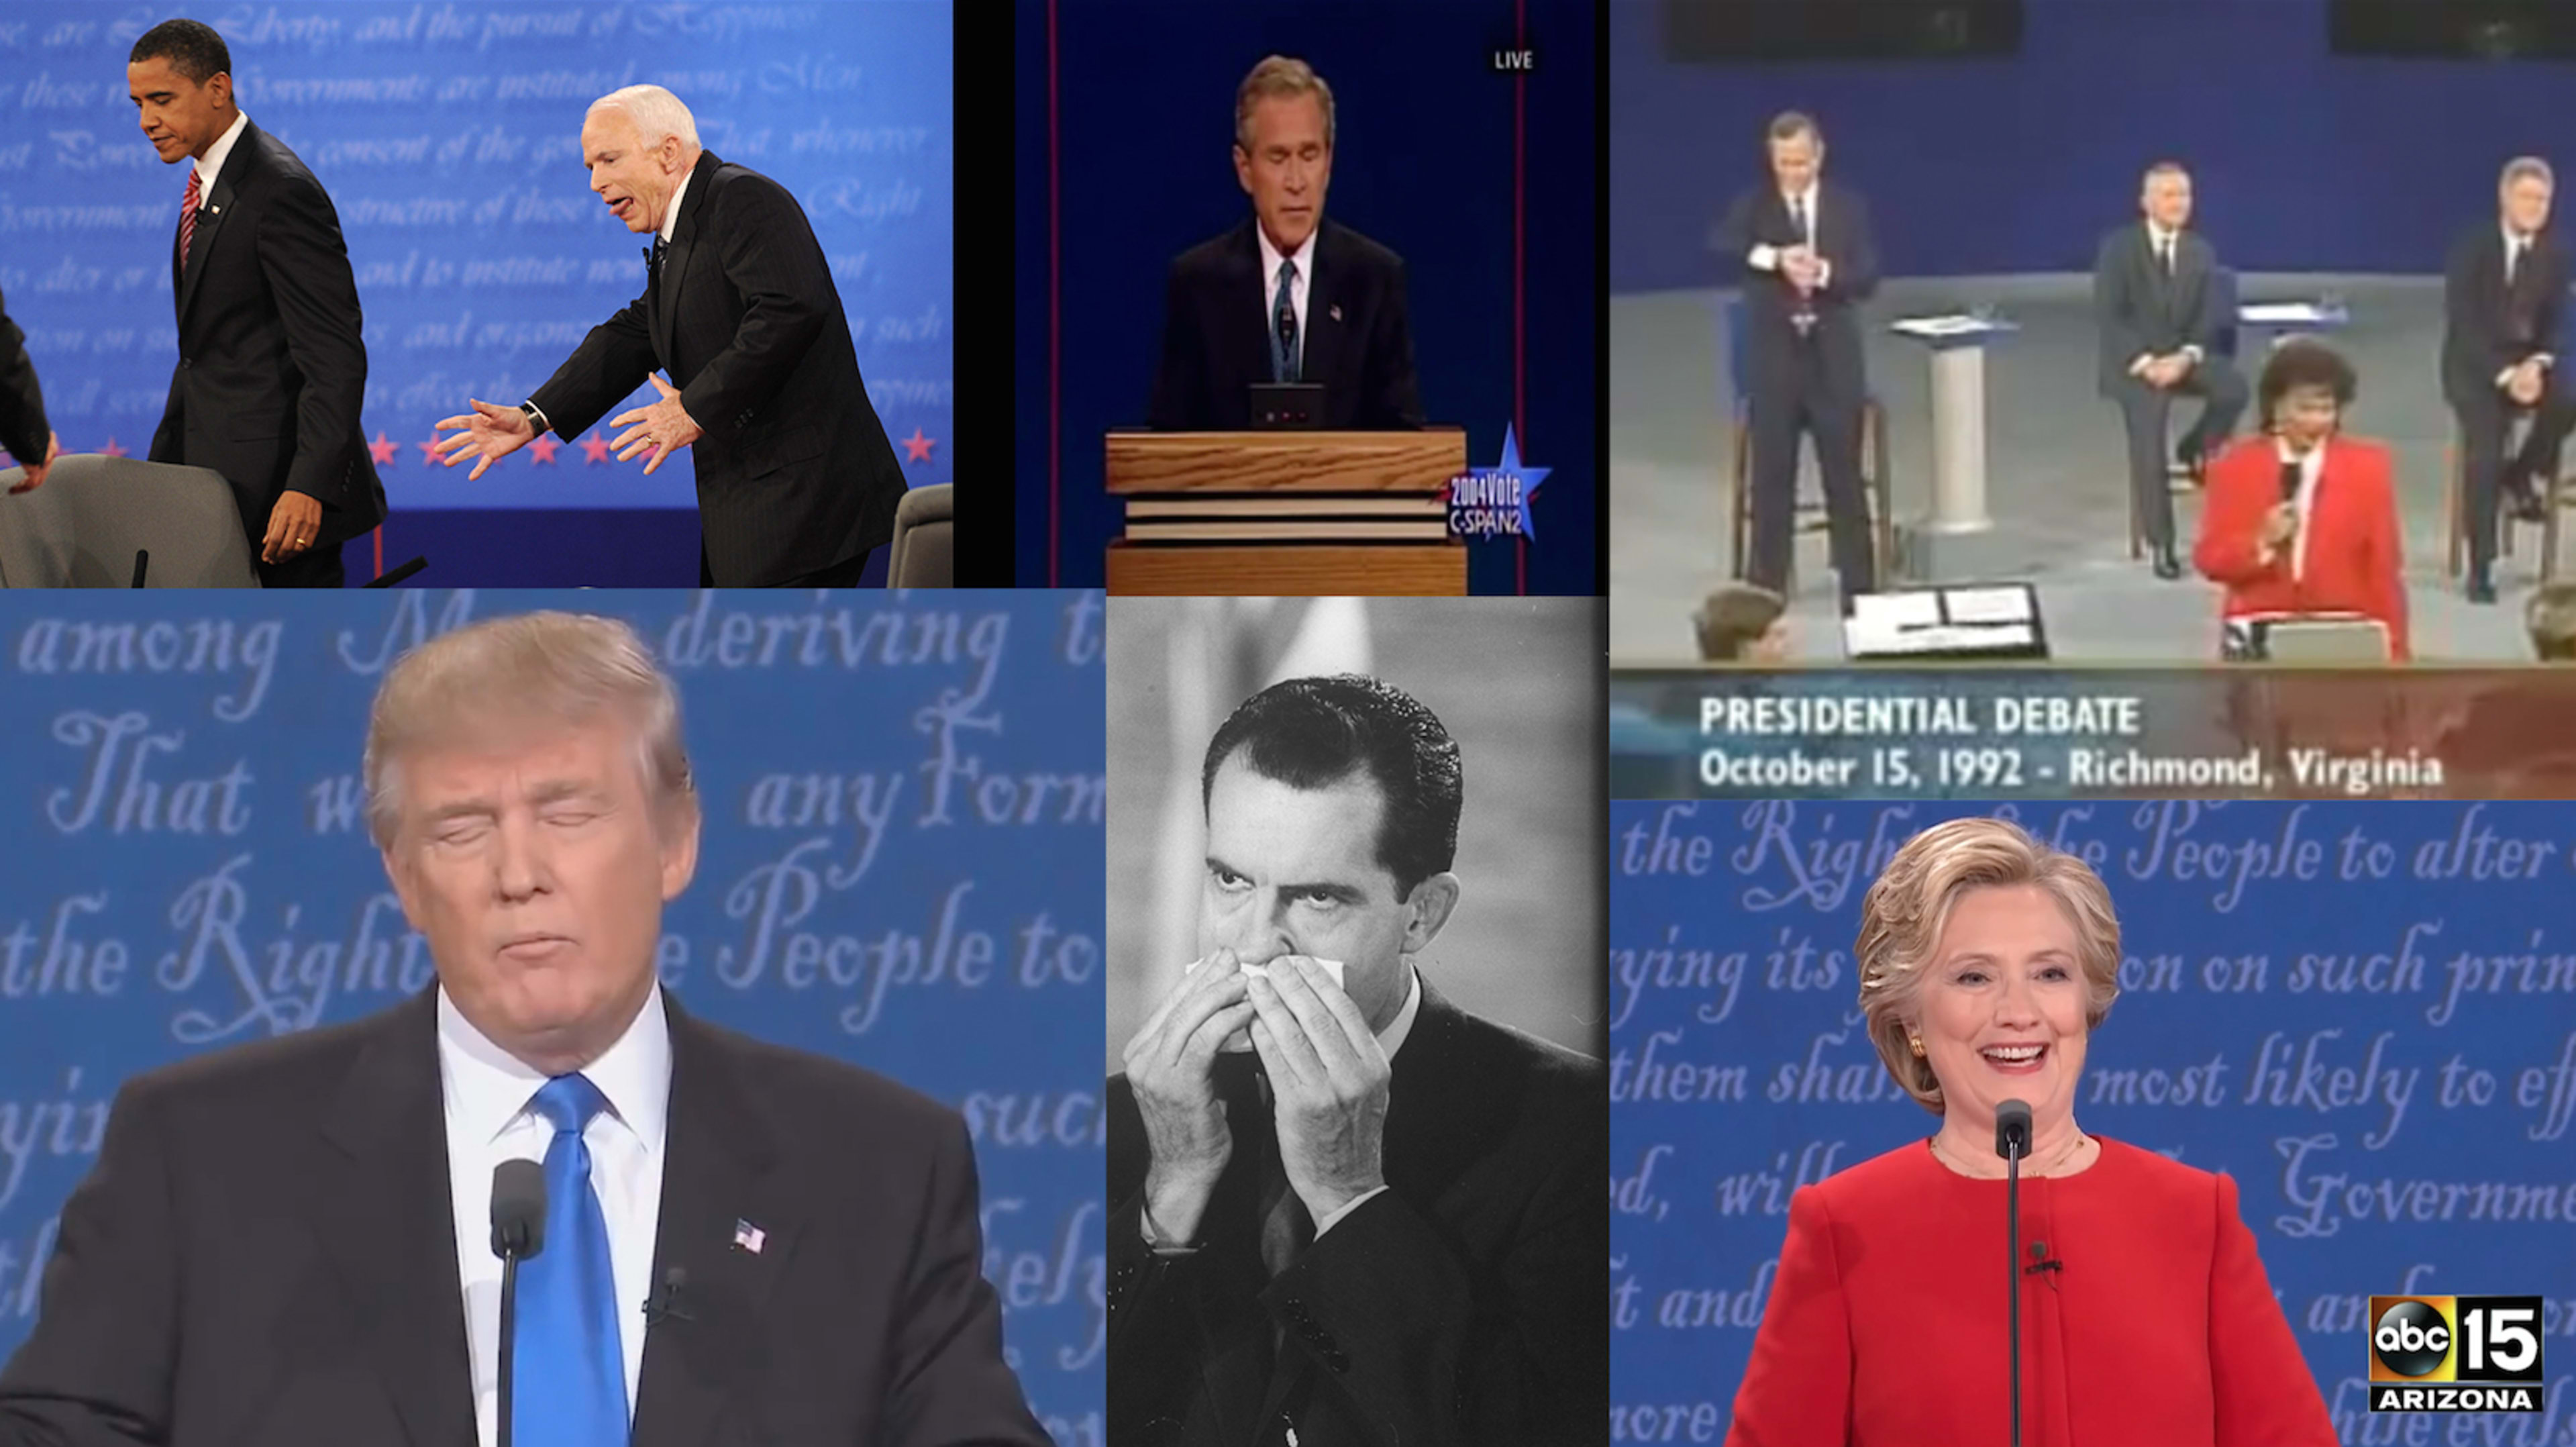 How A Candidate’s Body Language Can Lose An Election